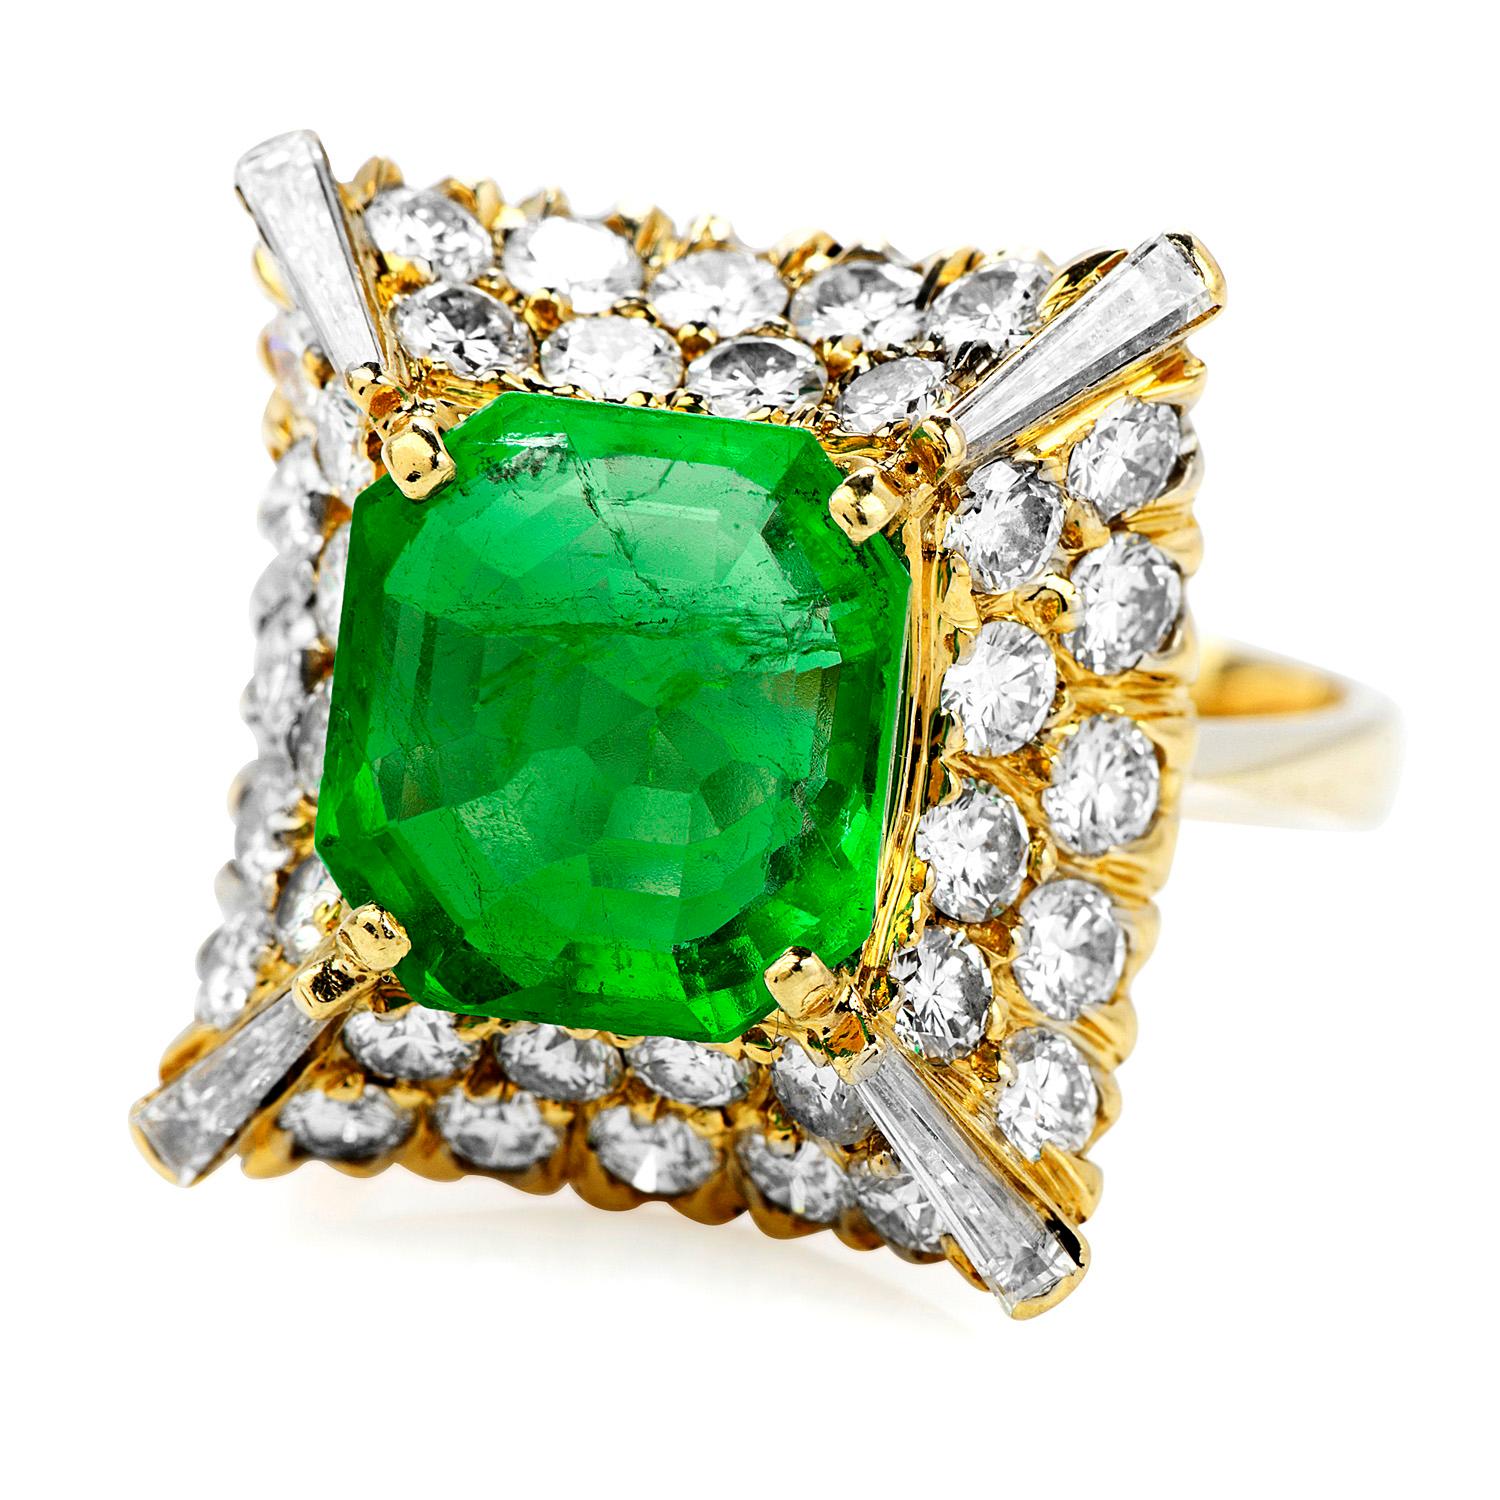 The Green Emerald & Diamond Floral Style Cocktail Ring gives the perfect look for springtime!

Crafted in 18K Yellow Gold,

Shine brightly with this Colombian emerald weighing approx. 2.80 carats approx. 4 Baguettes cut Diamonds on each corner of